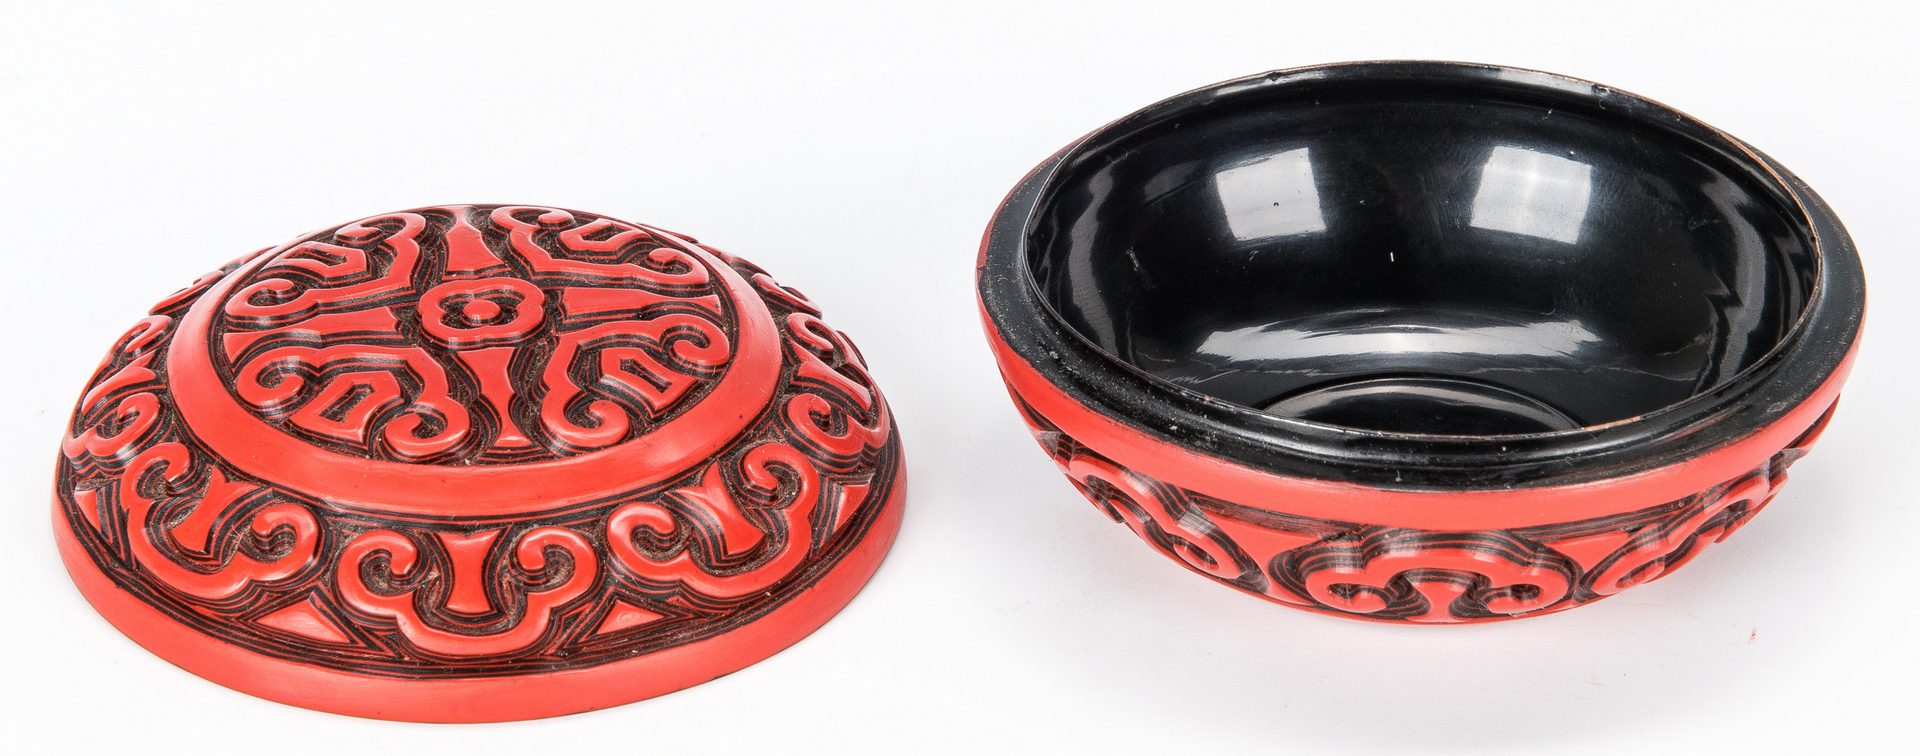 Lot 447: 3 Chinese lacquer items